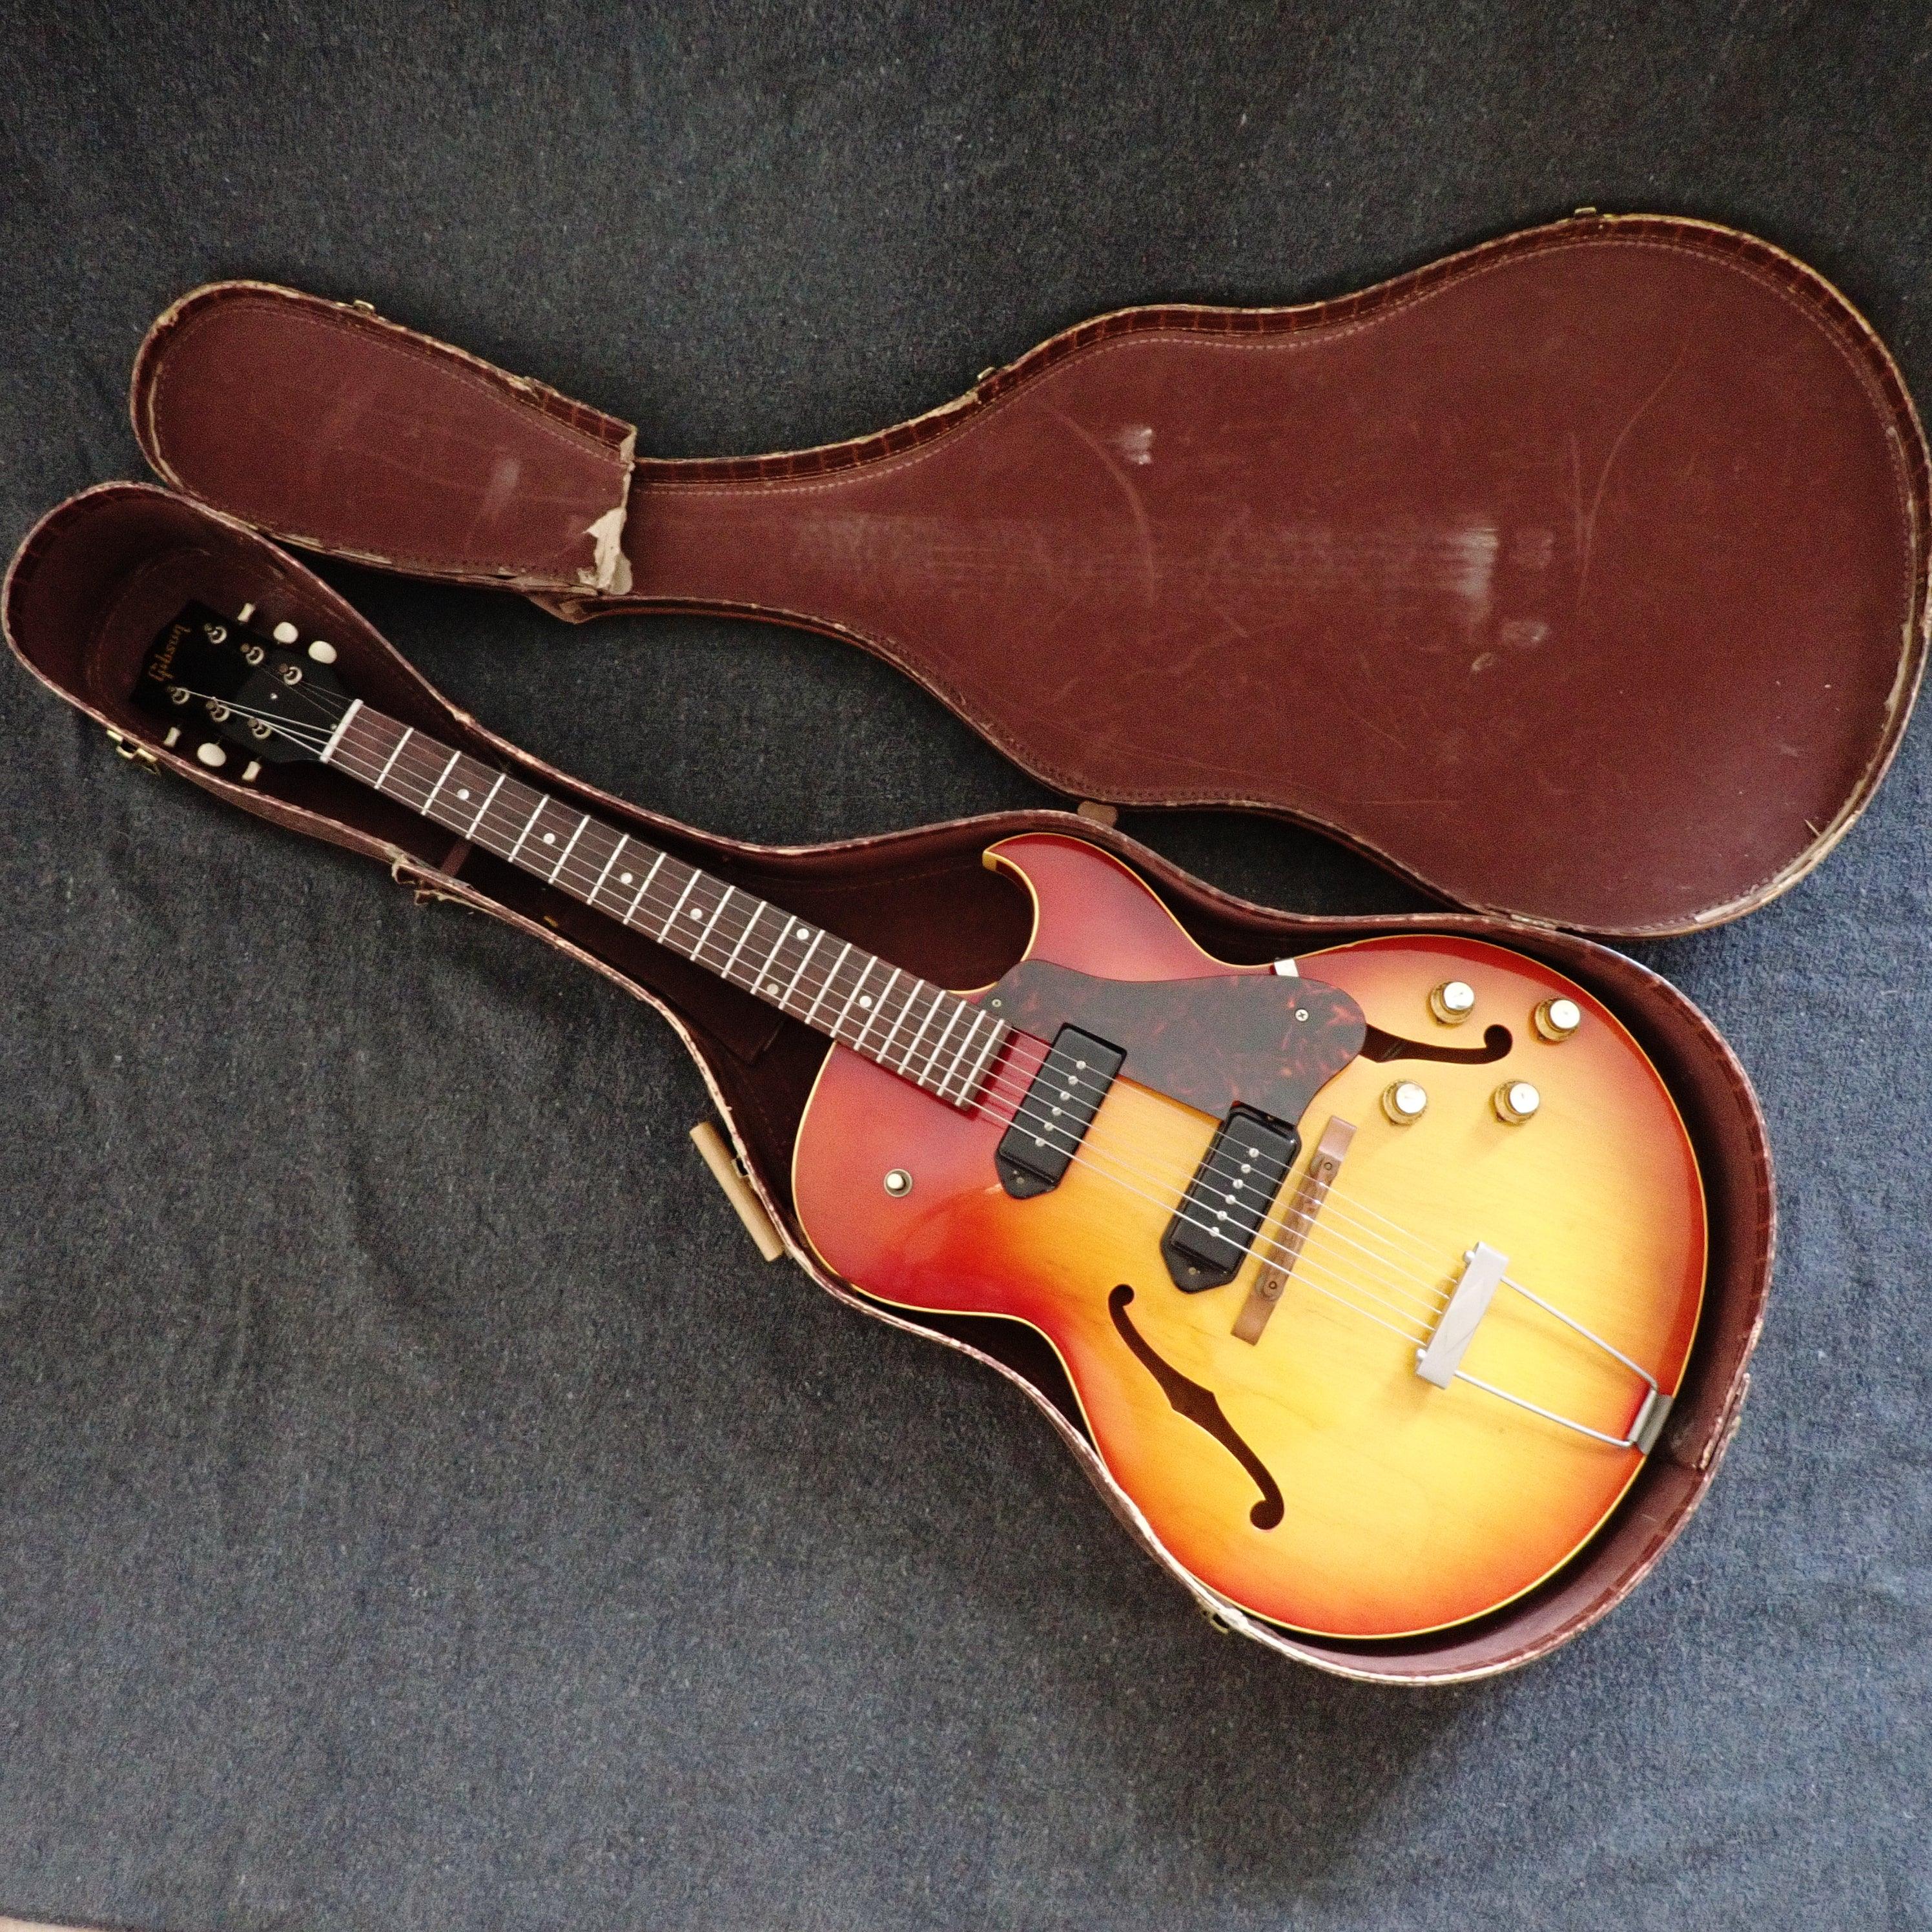 Gibson ES-125 TDC Sunburst near mint from 1963 - one owner, with original case and receipt - wurst.guitars